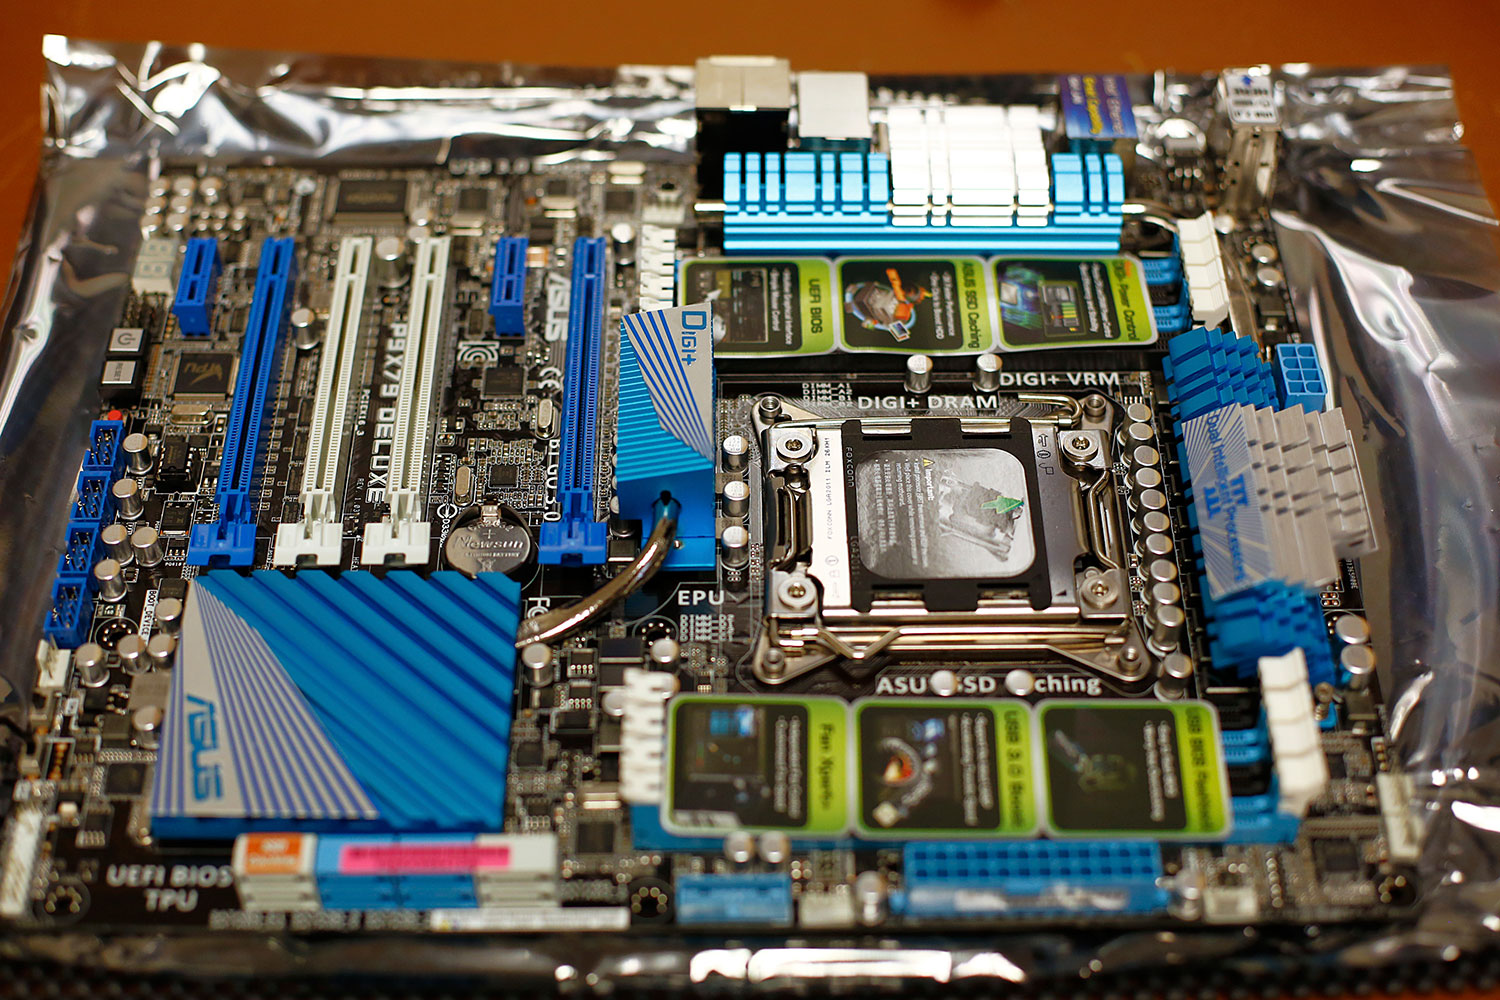 My new&nbsp;Asus P9X79 Deluxe motherboard sitting on the anti-static wrapper after unpackaging it.